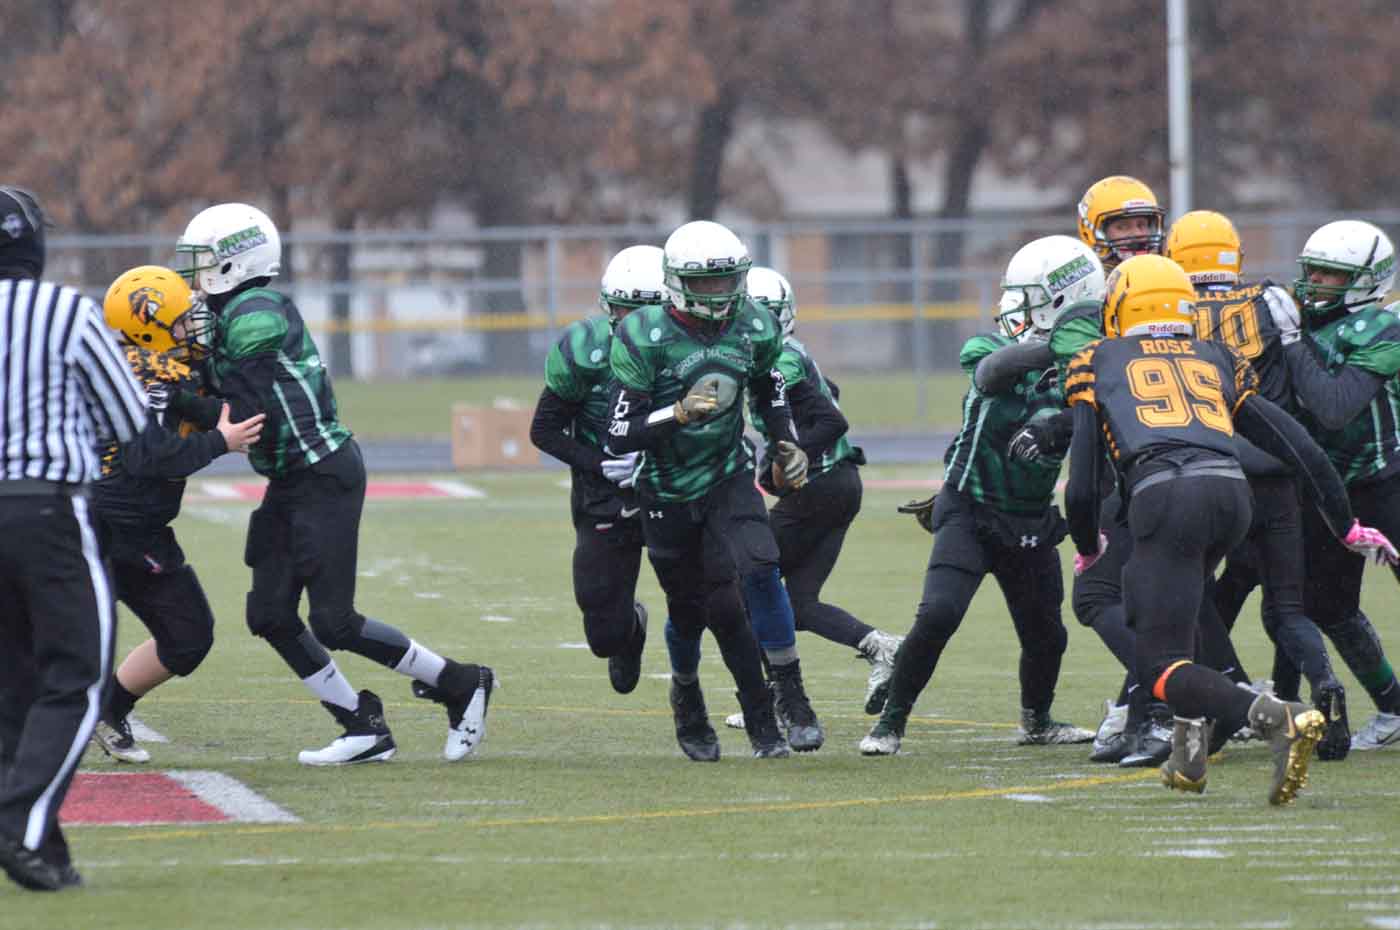 Youth football action shot on field